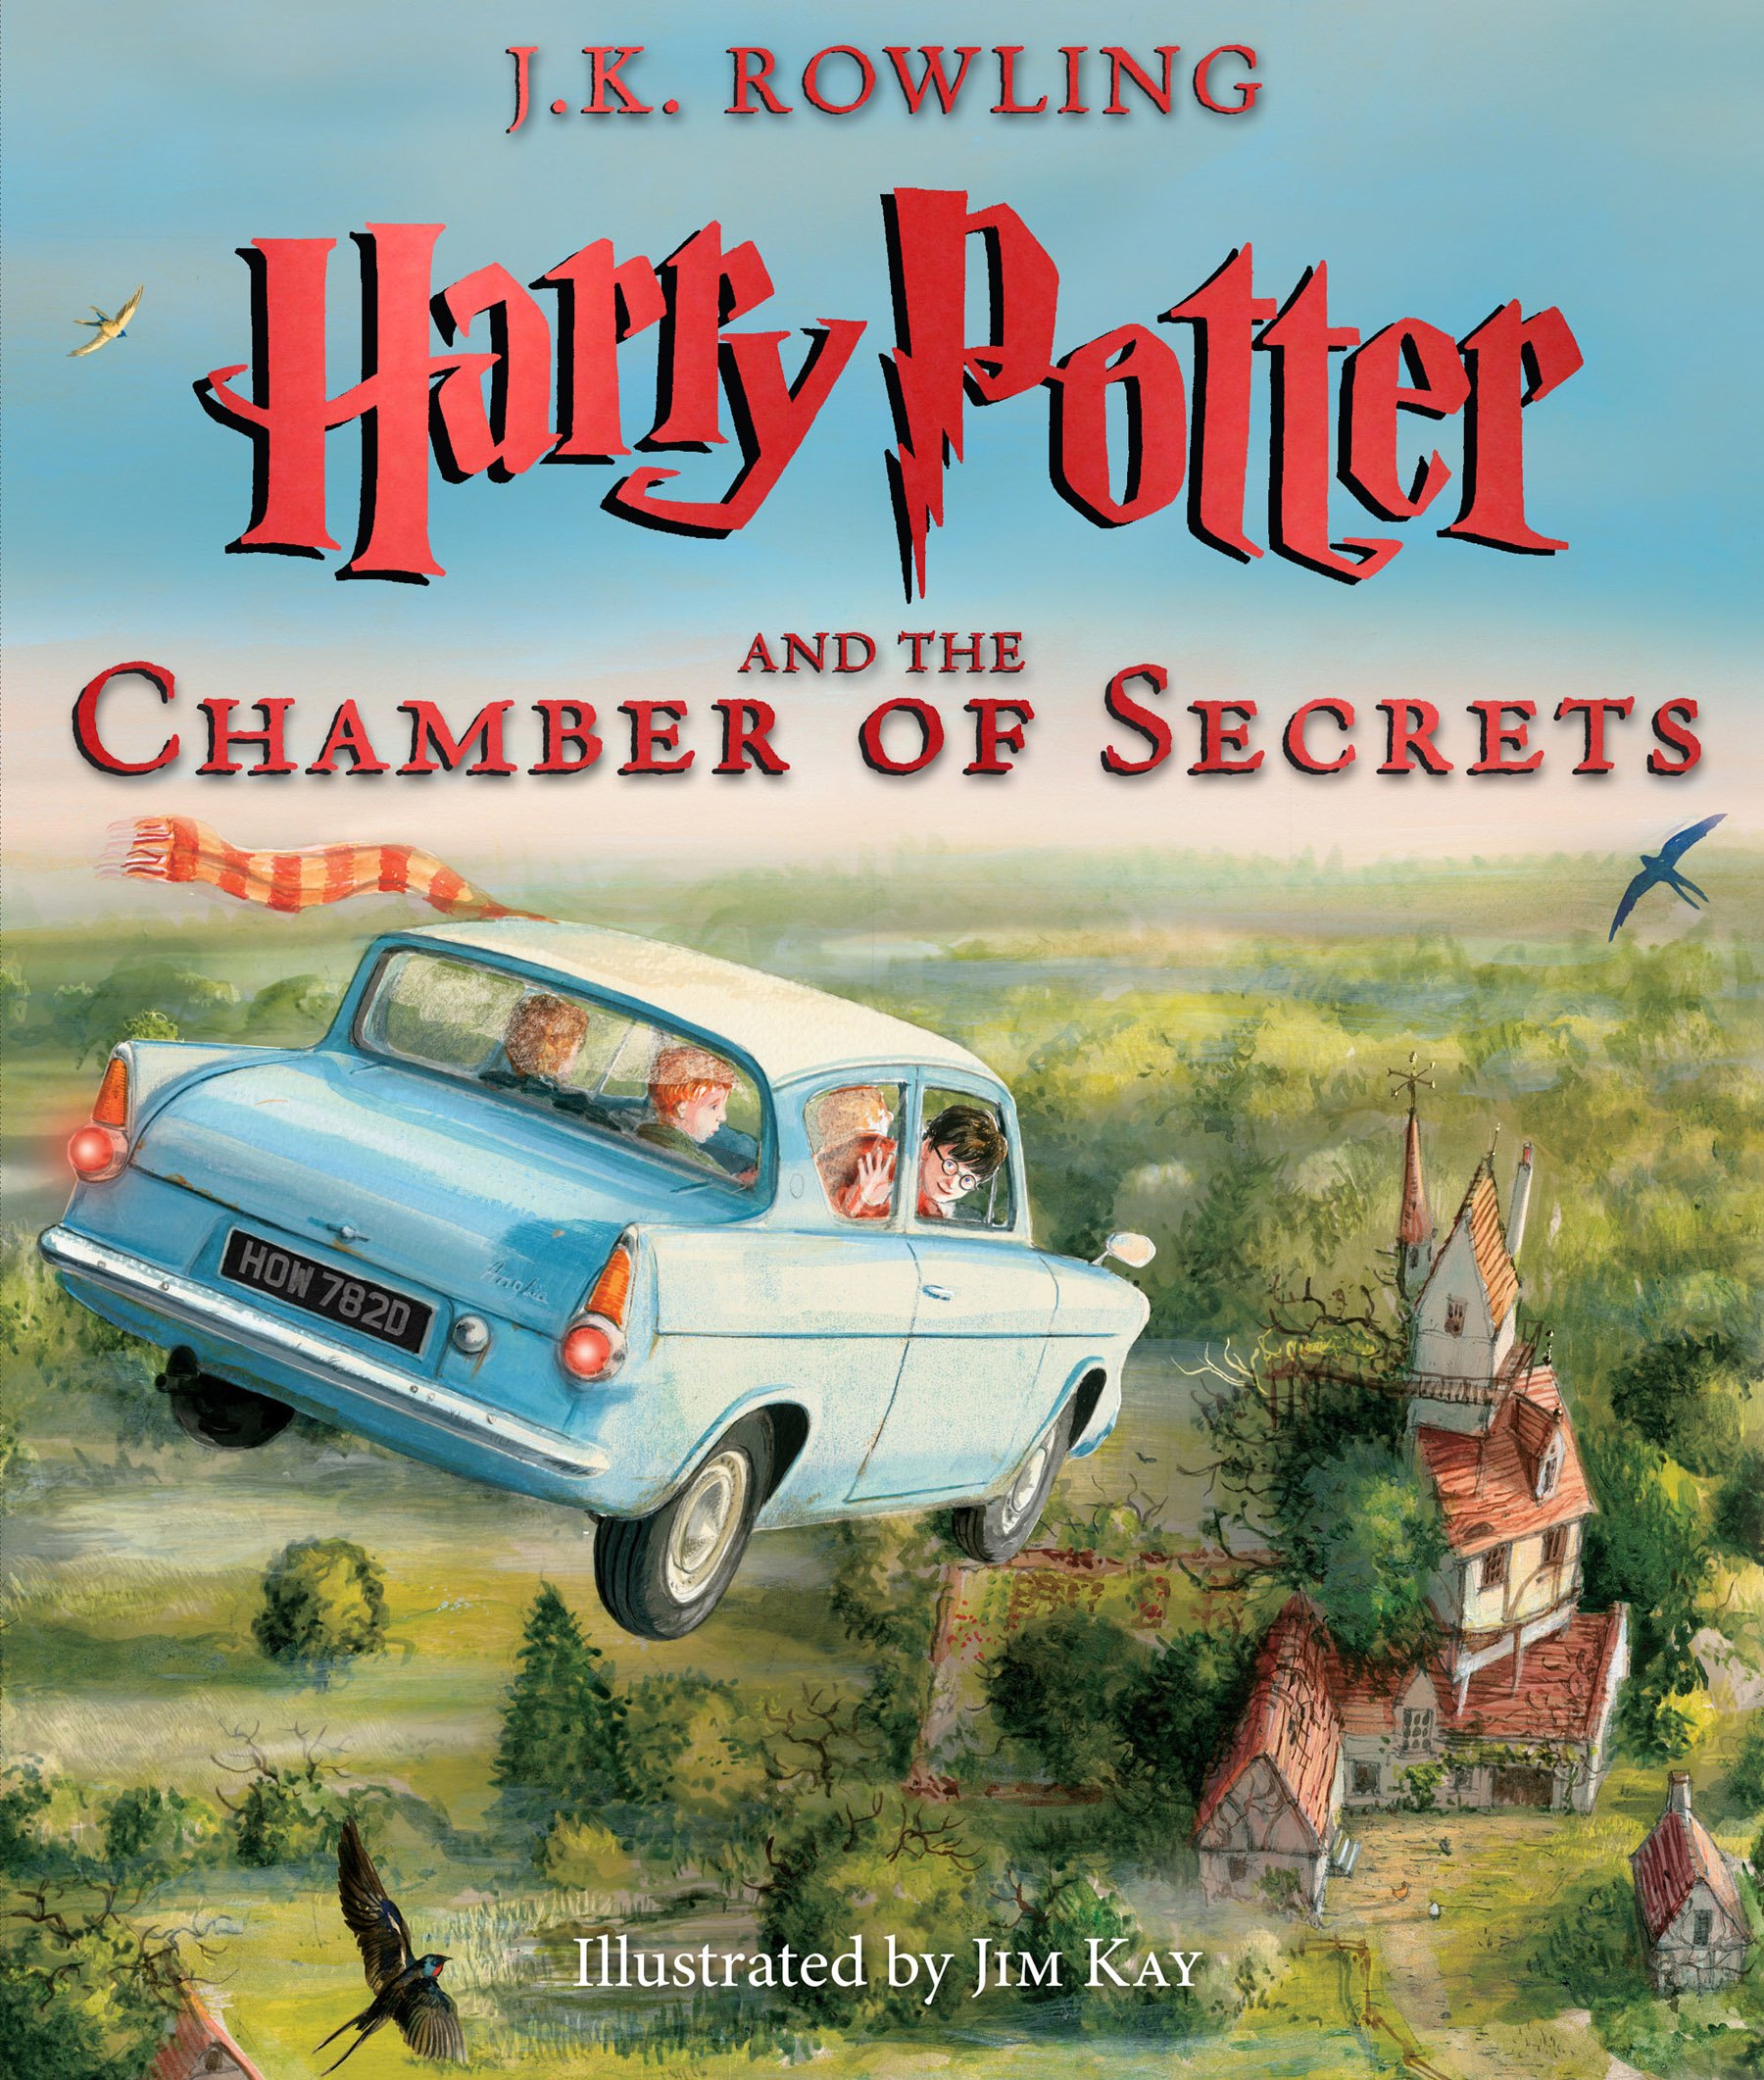 Harry Potter And The Chamber Of Secrets #2